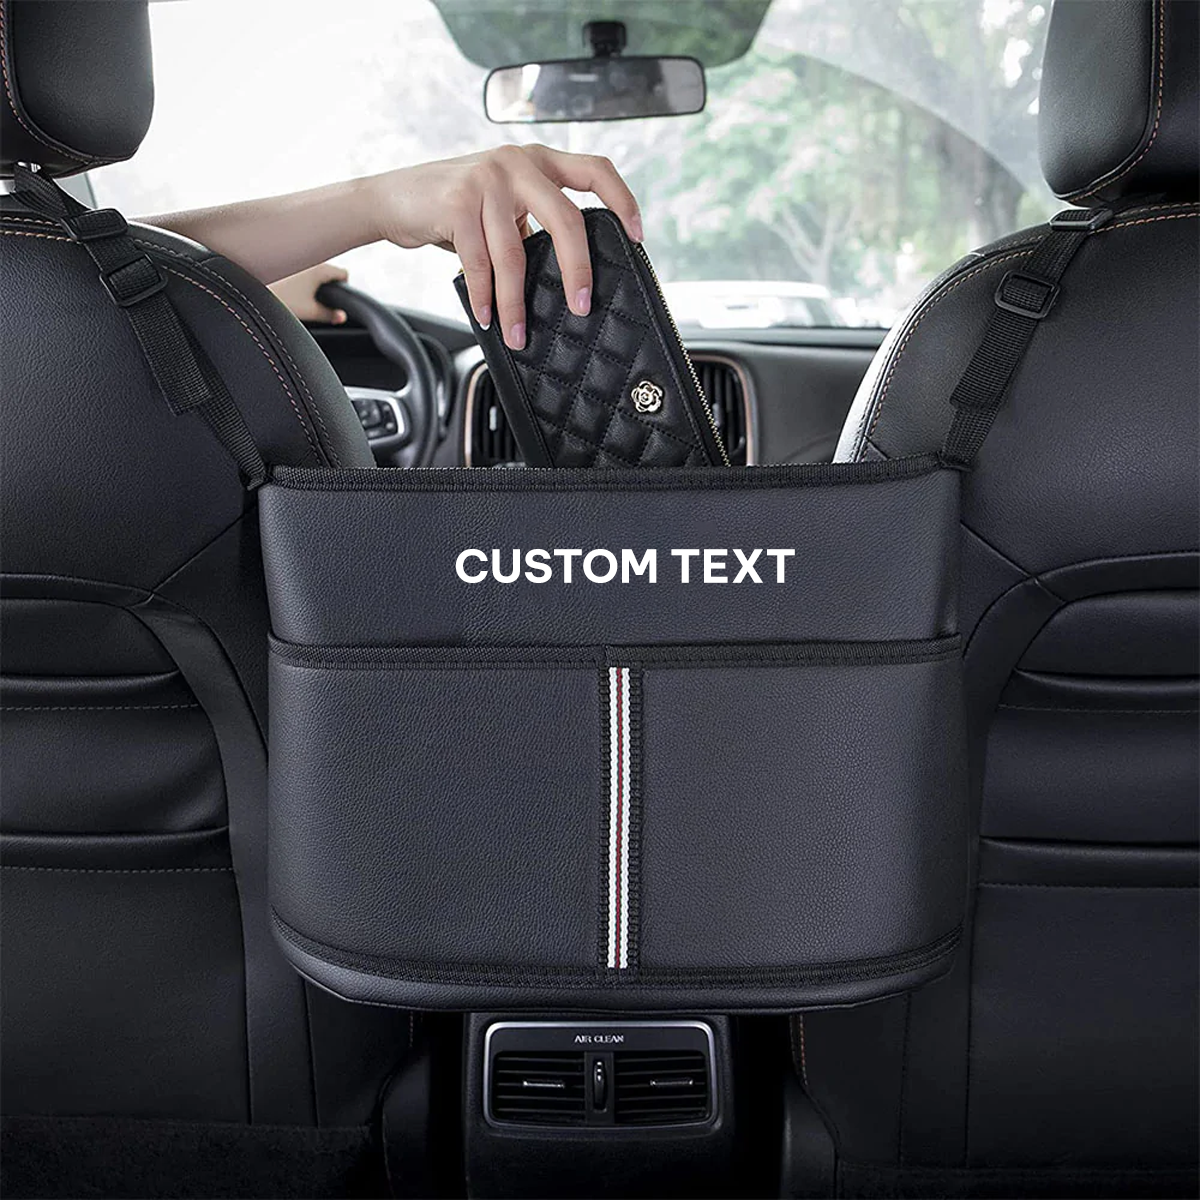 Custom Text For Car Purse Holder for Car Handbag Holder Between Seats Premium PU Leather, Compatible with All Cars, Auto Driver Or Passenger Accessories Organizer, Hanging Car Purse Storage Pocket Back Seat Pet Barrier FT11991